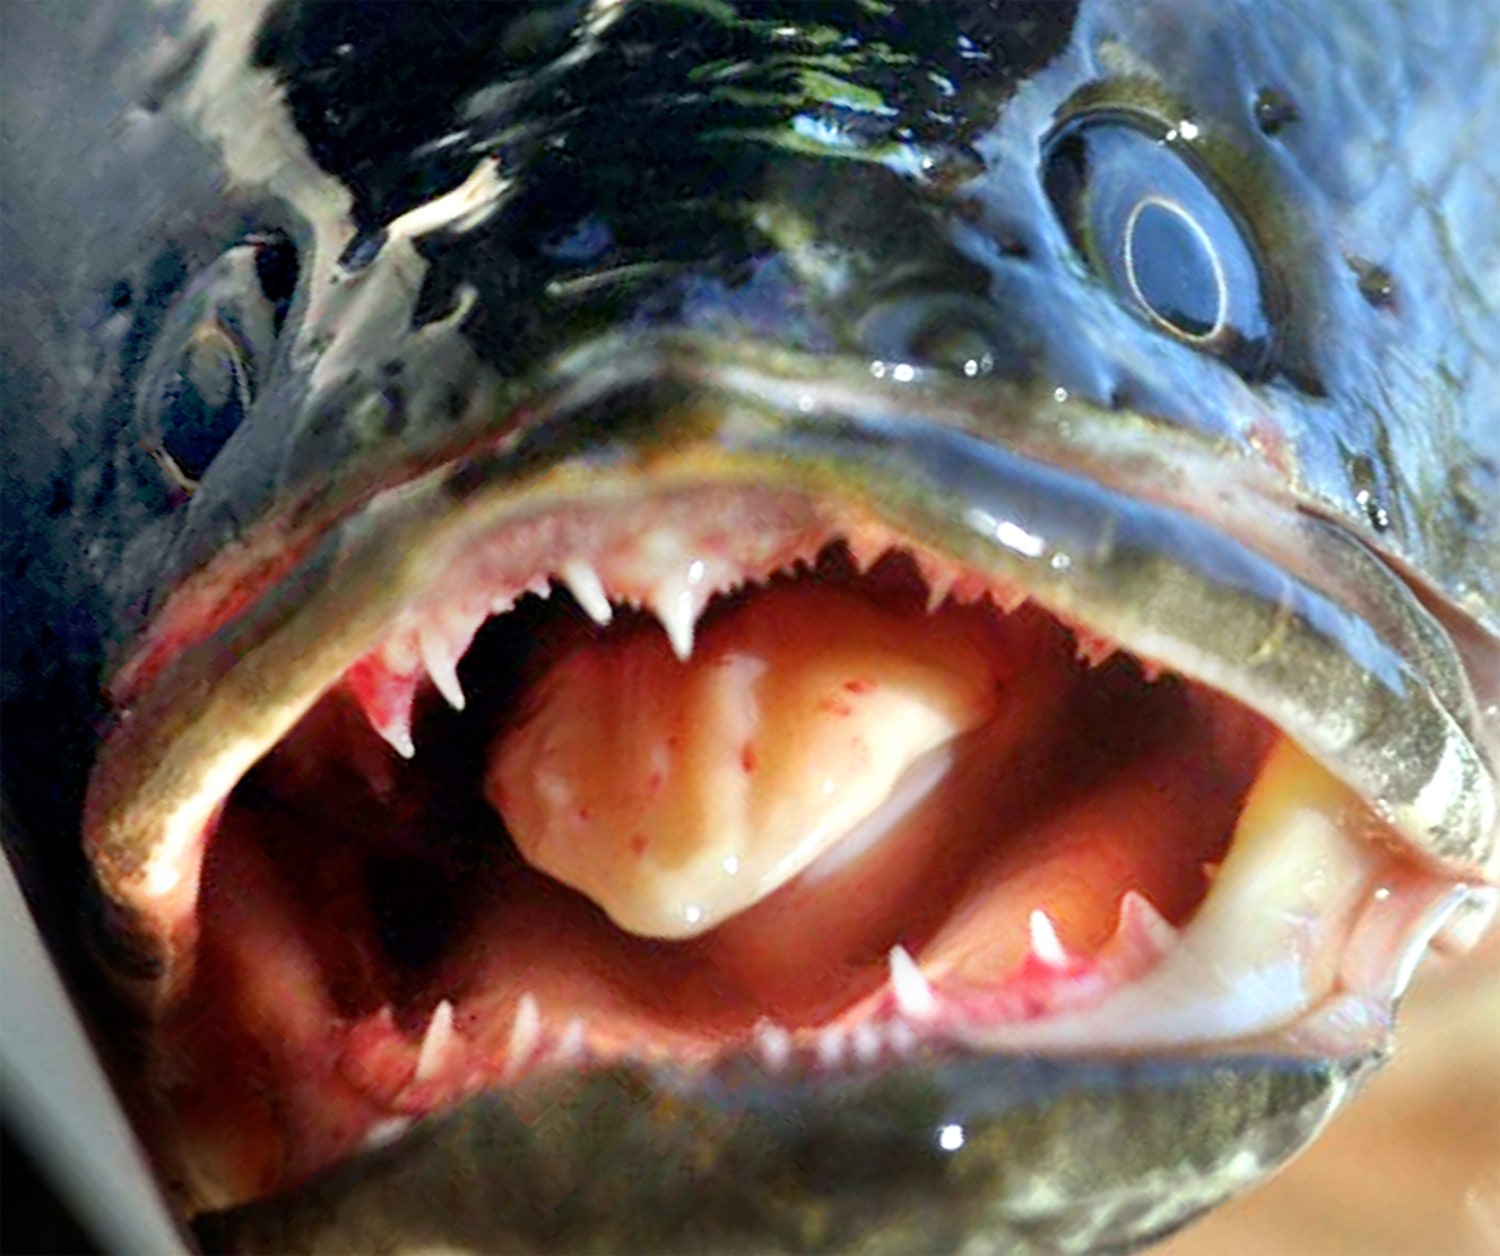 Snakehead may be at home in Potomac River